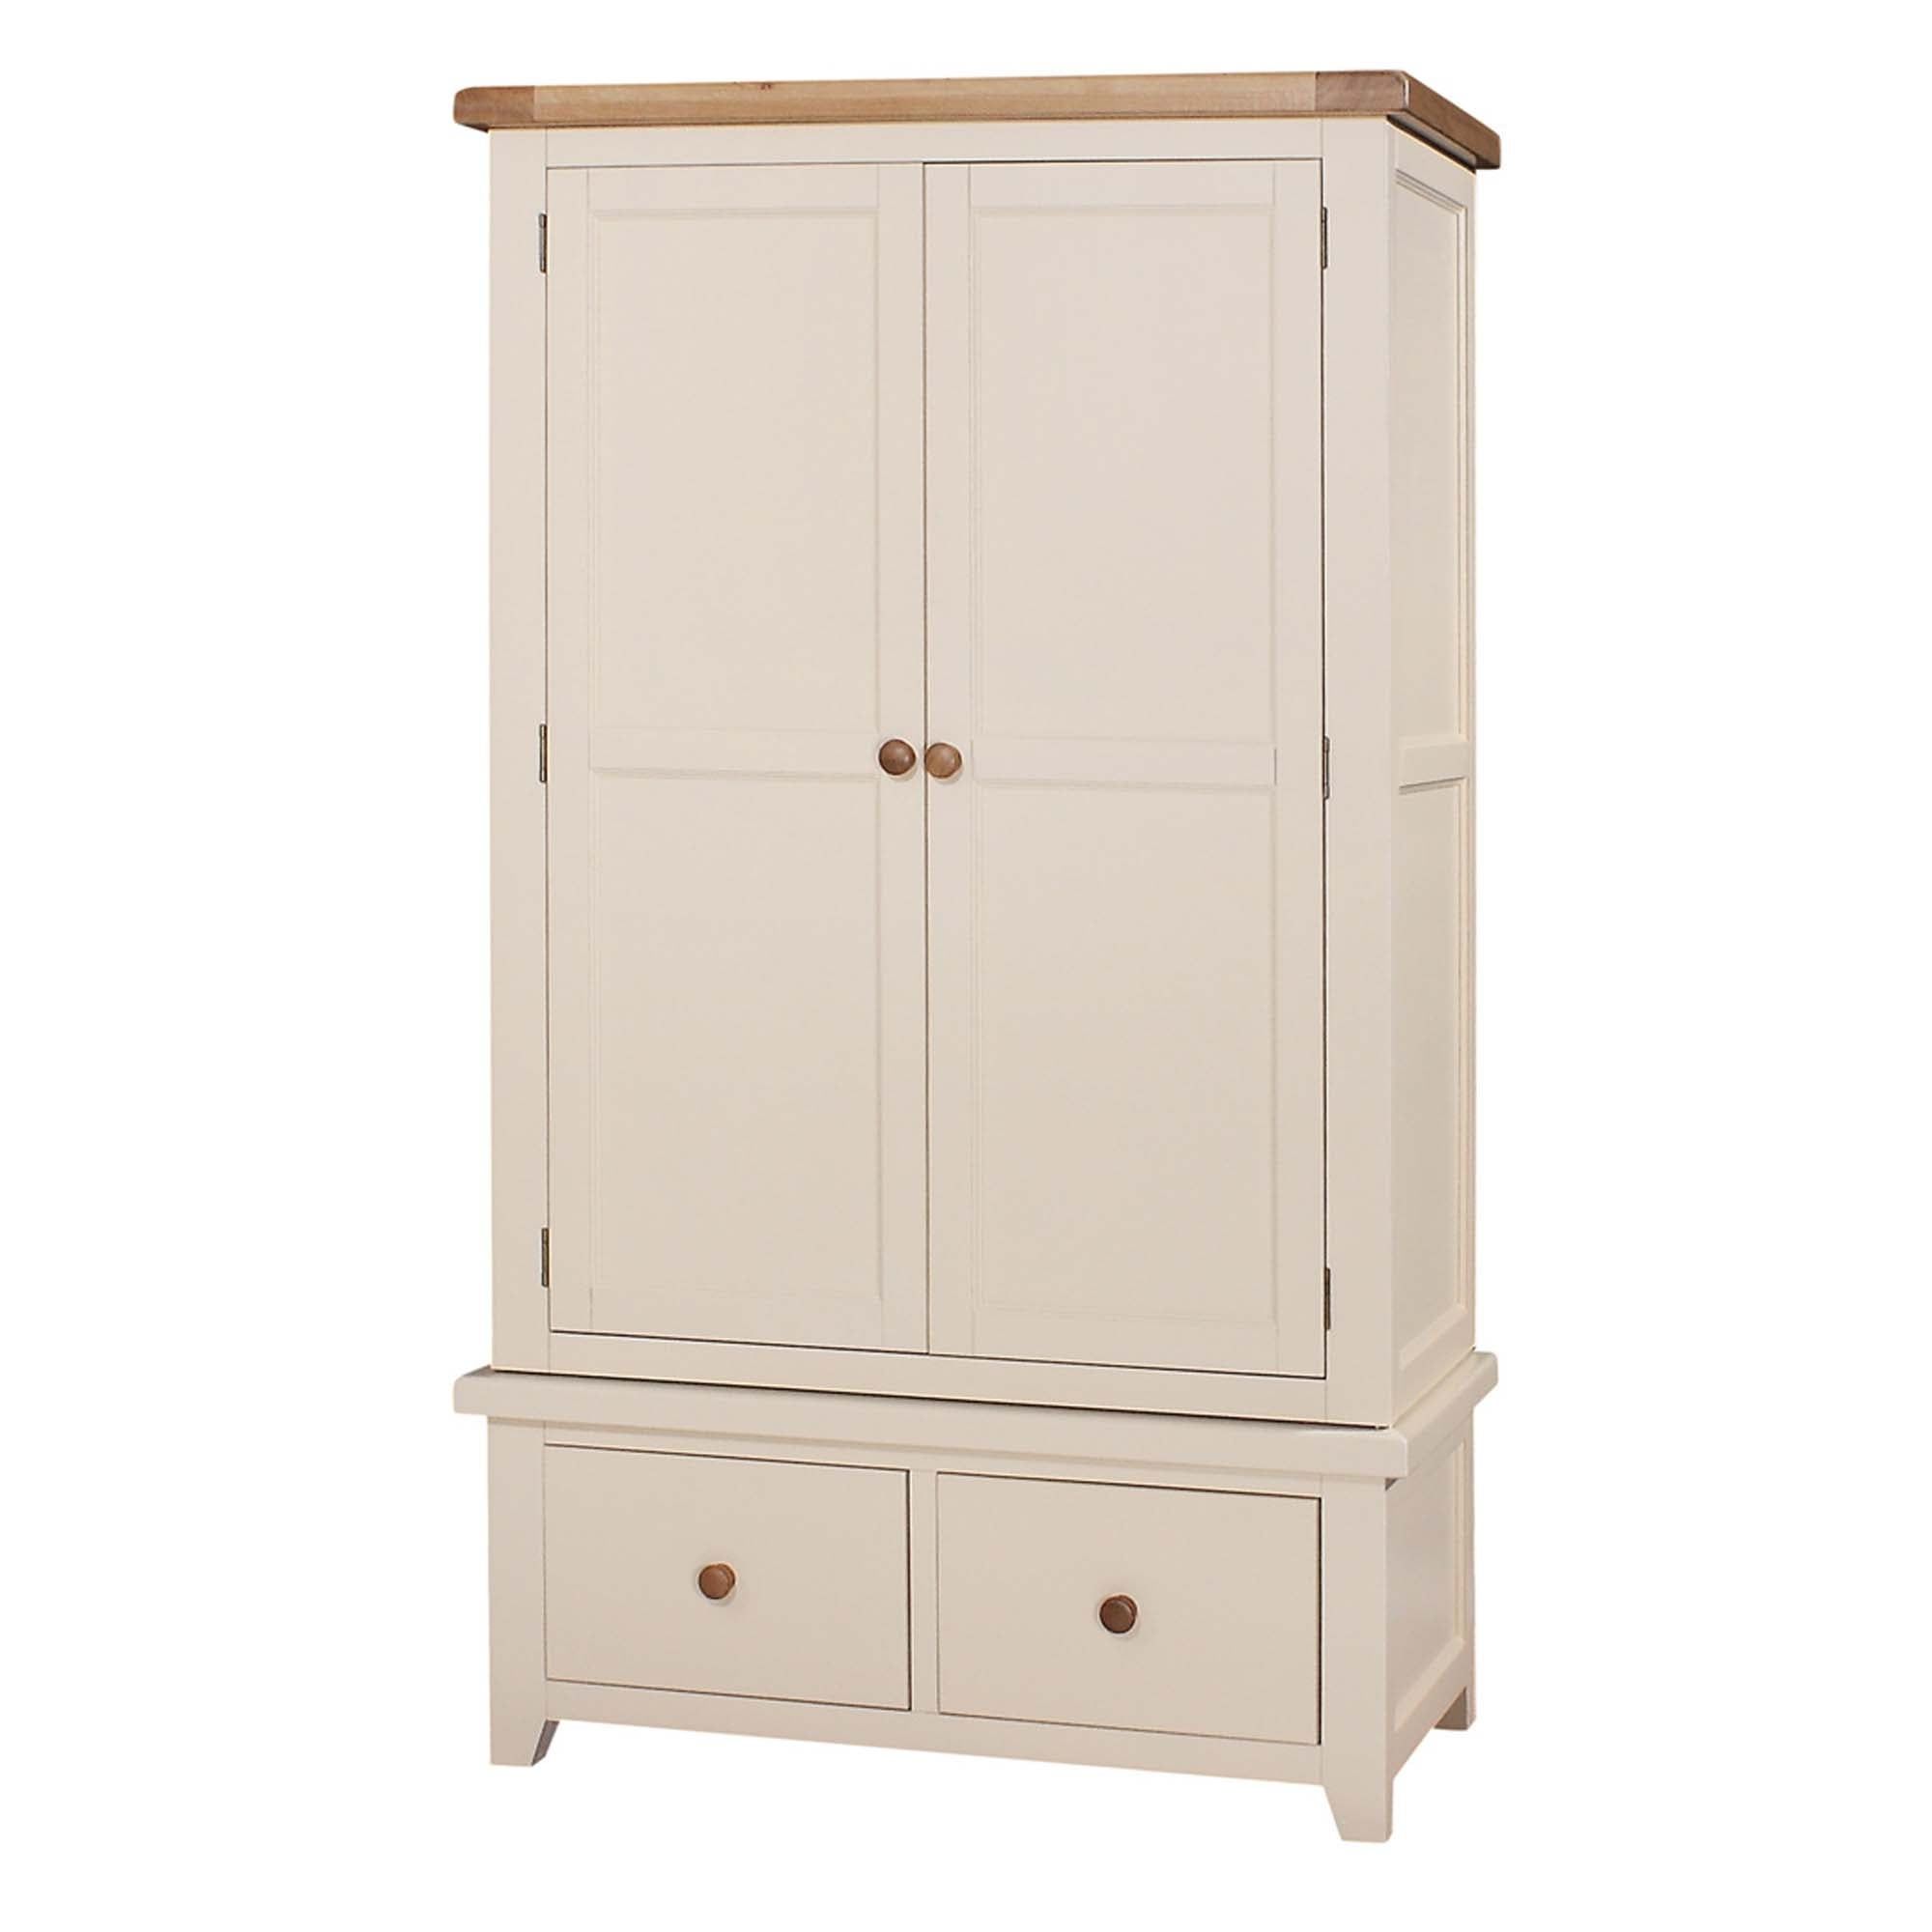 Juliet Oak/cream Double Wardrobe With Drawers With Cream Wardrobes (View 11 of 20)